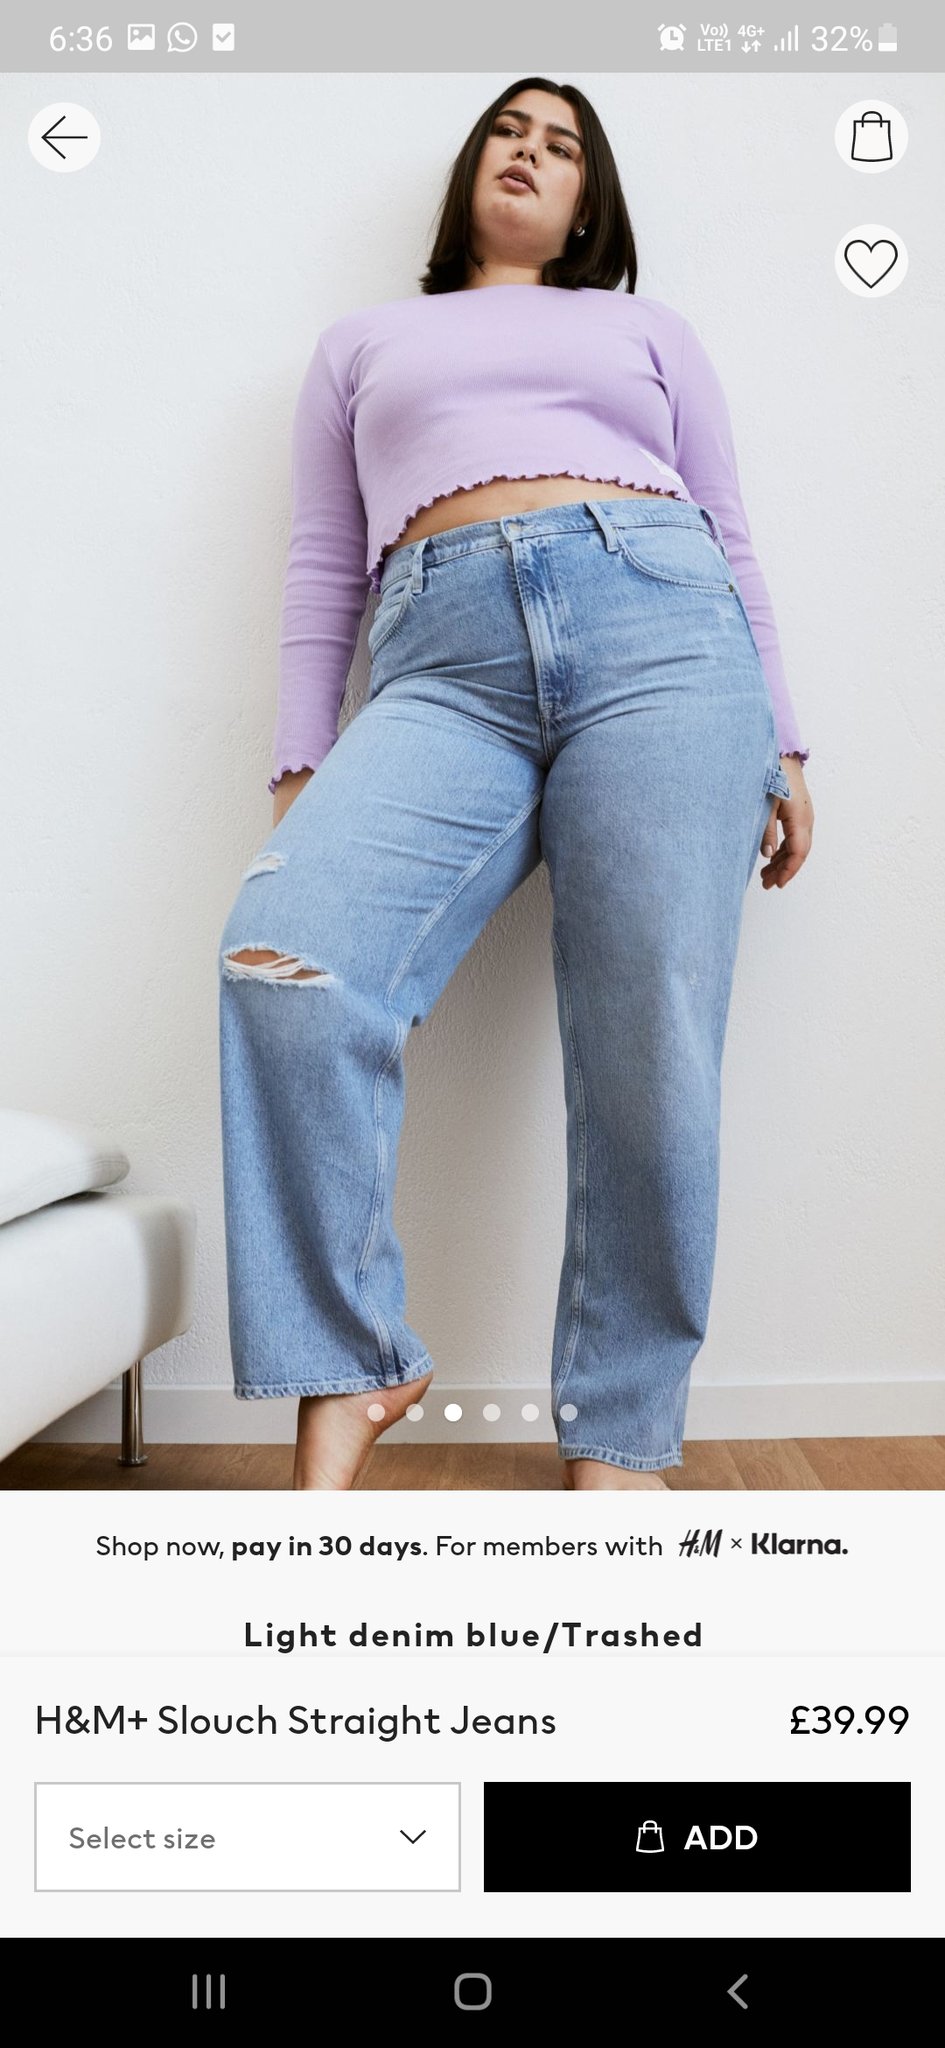 Høre fra Pjece trofast JinJoonieJin on Twitter: "Hi h&m india. Yk it won't be so bad if I could  get these in my size too in india. But h&m india doesn't think plus size  women in